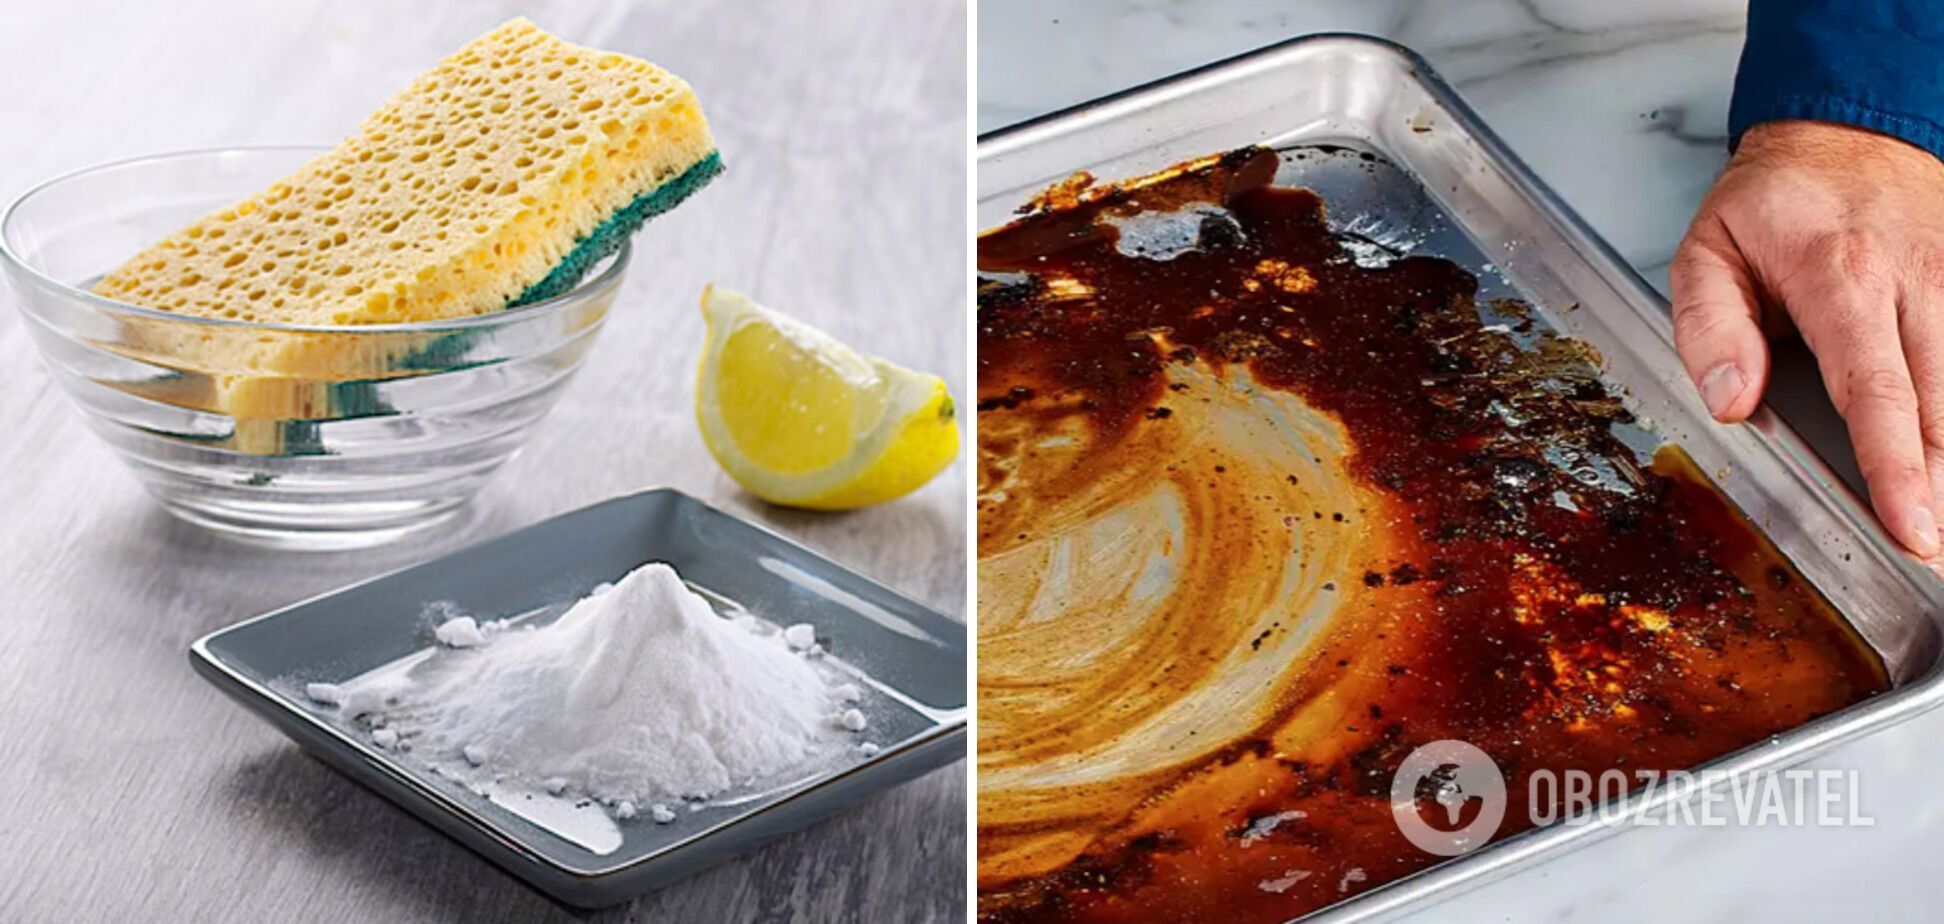 How to clean a dirty baking sheet